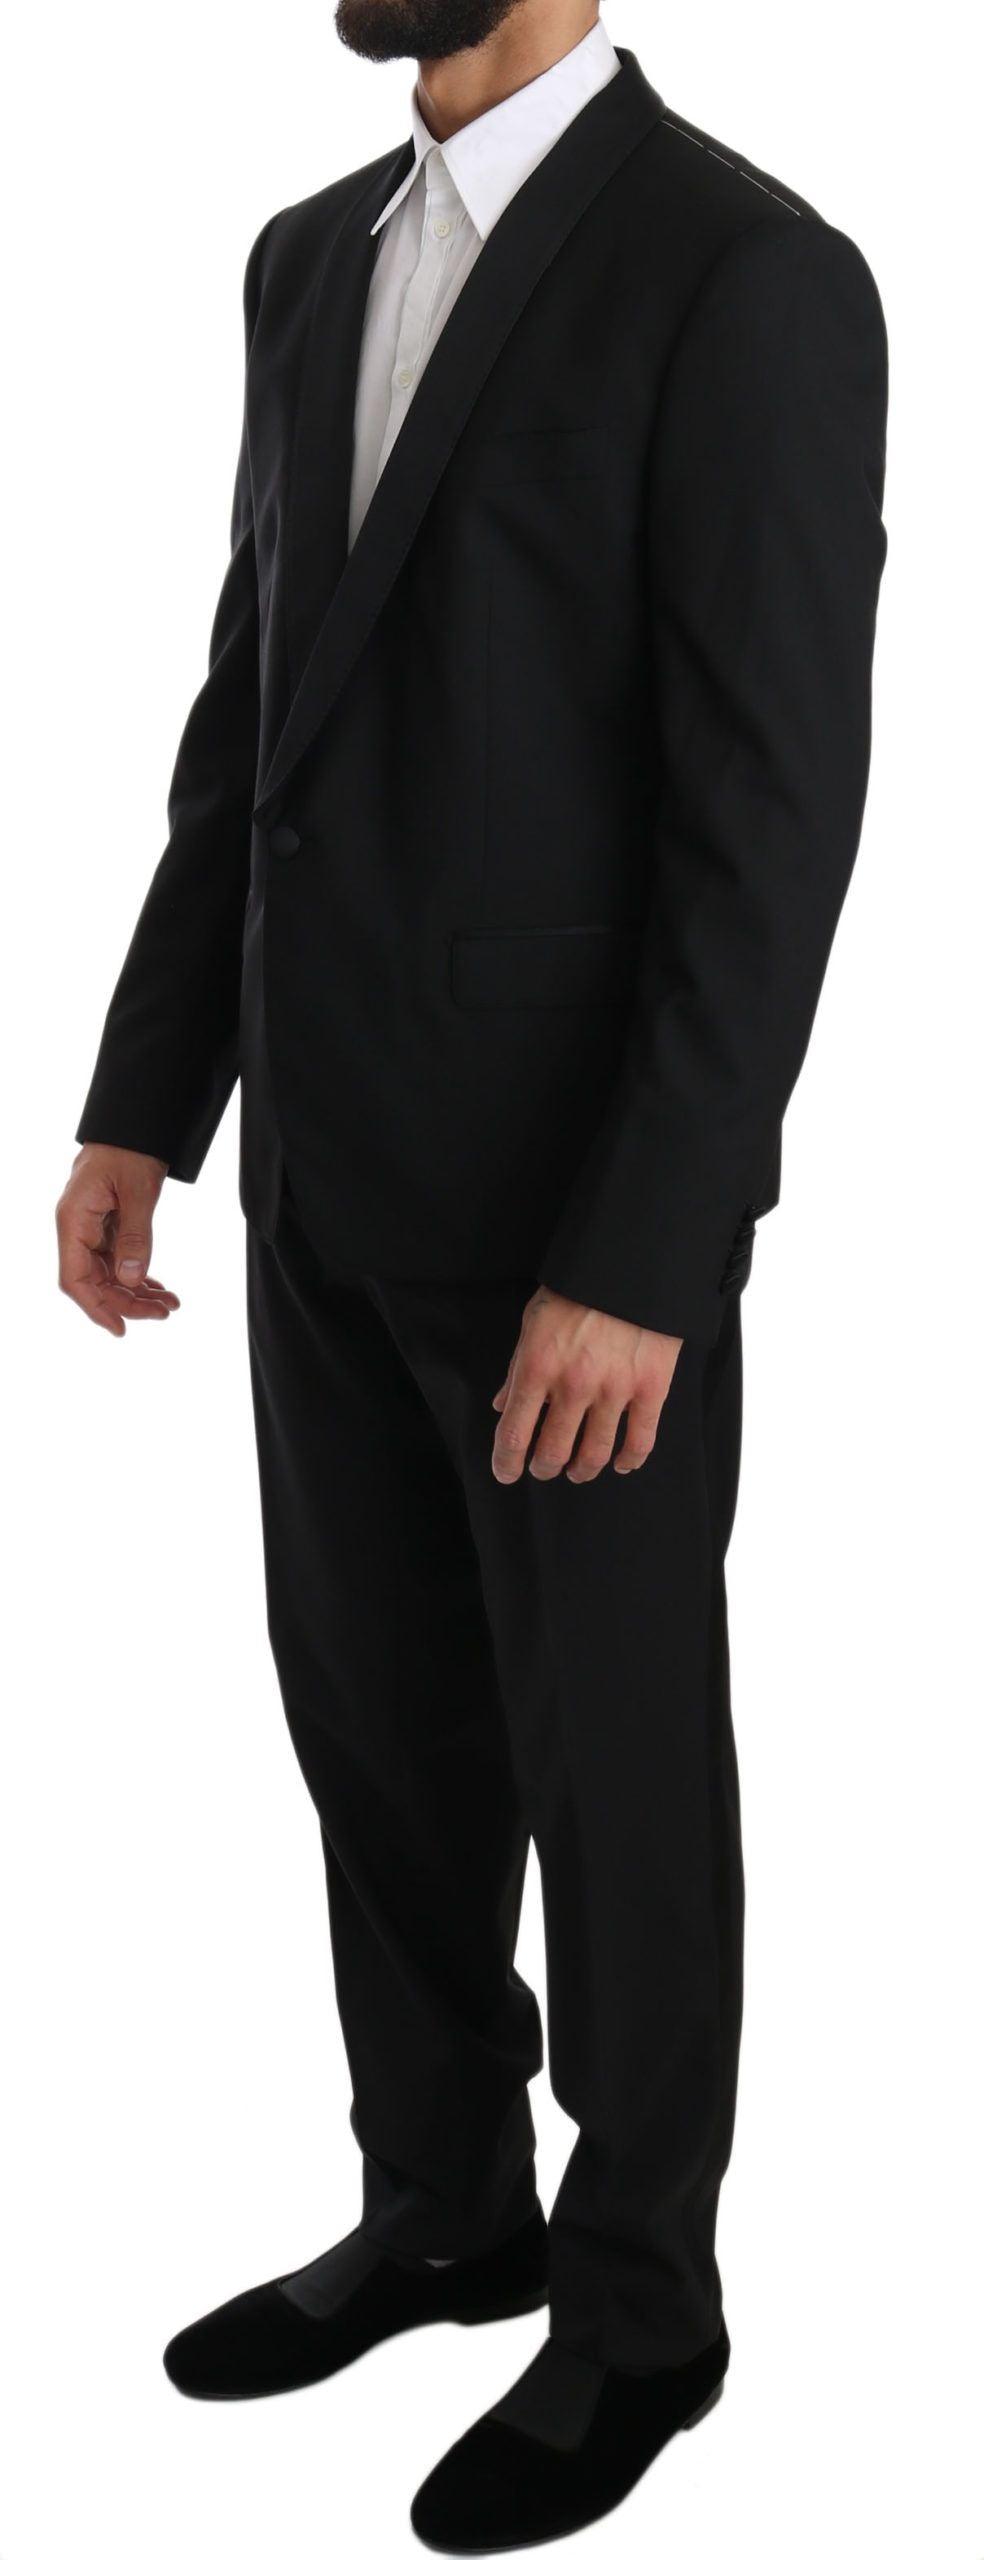 Dolce & Gabbana Men's Black Wool One Button Slim Martini Suit - Designed by Dolce & Gabbana Available to Buy at a Discounted Price on Moon Behind The Hill Online Designer Discount Store